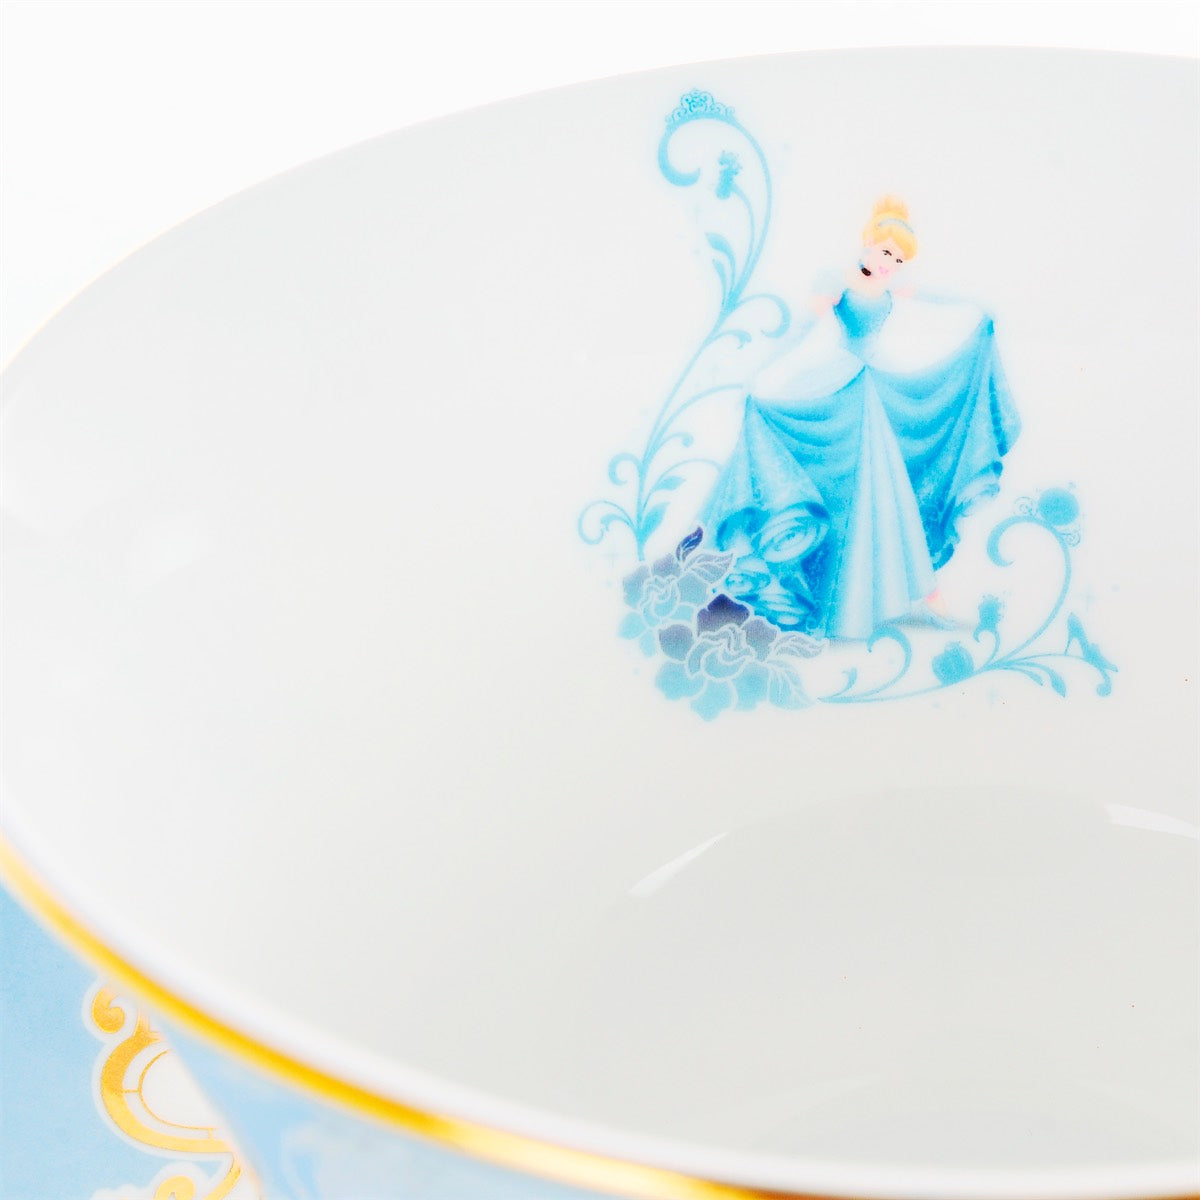 Cinderella Bone China Cup And Saucer From  The Disney Princess Collection